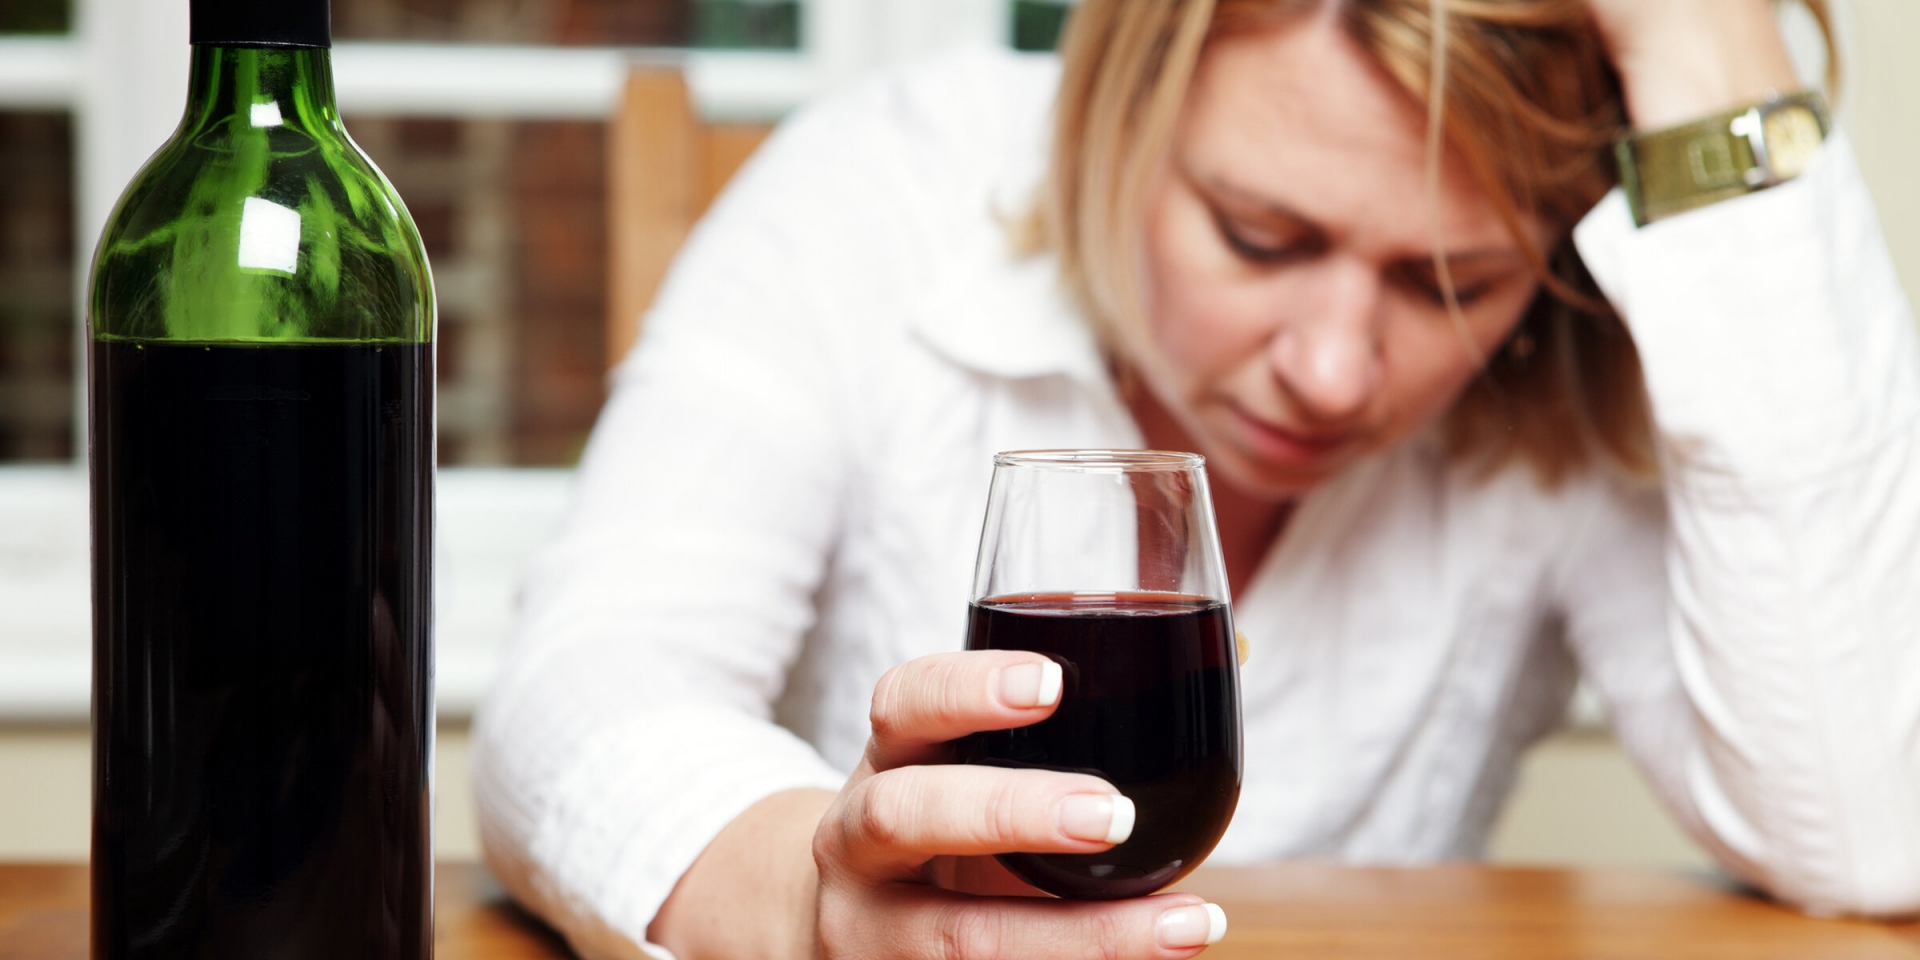 drinking alcohol can increase the risk of getting coronavirus